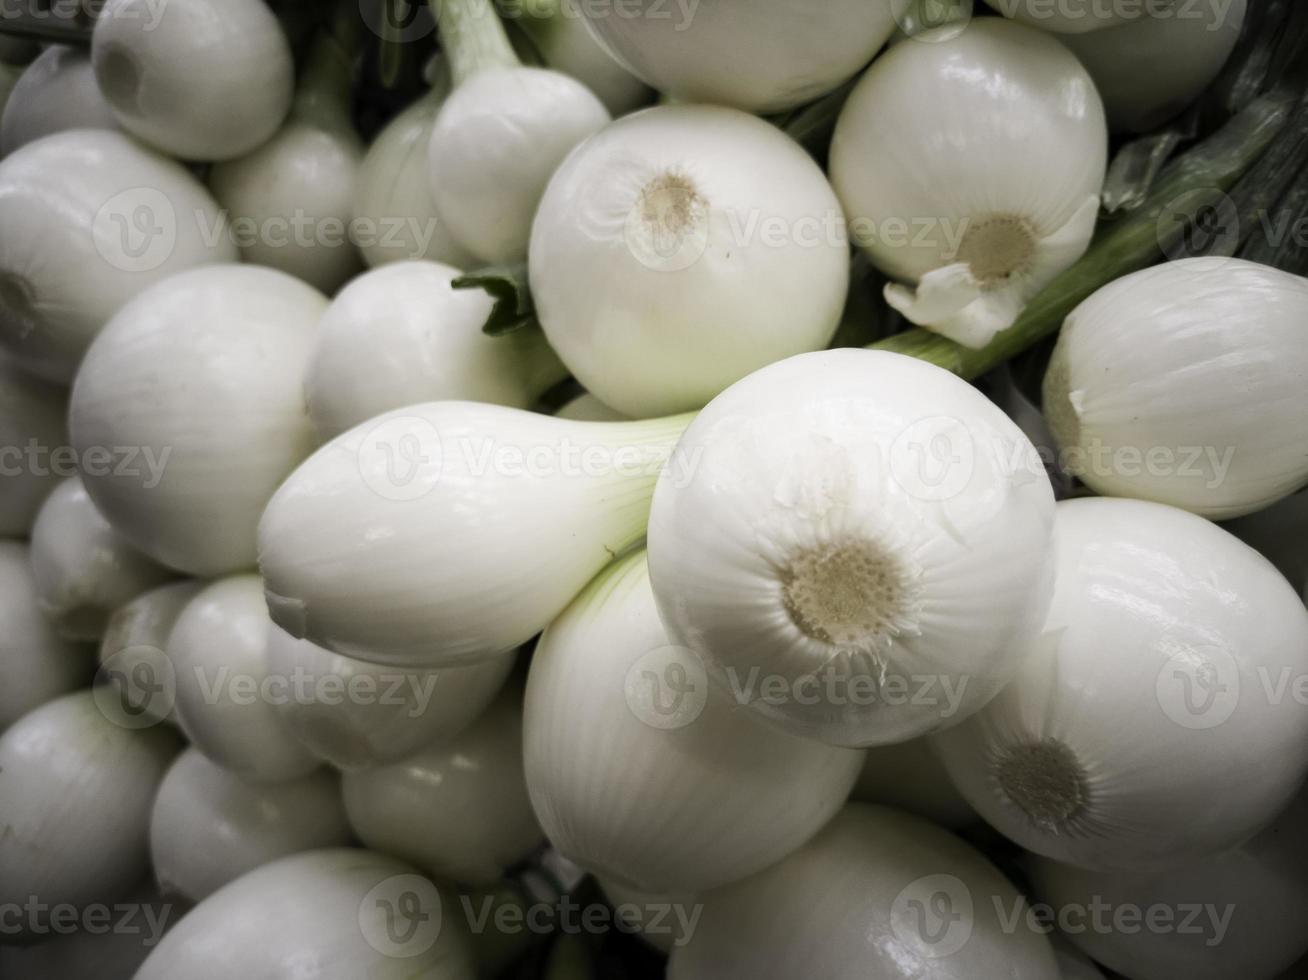 Ecological onions in a market photo